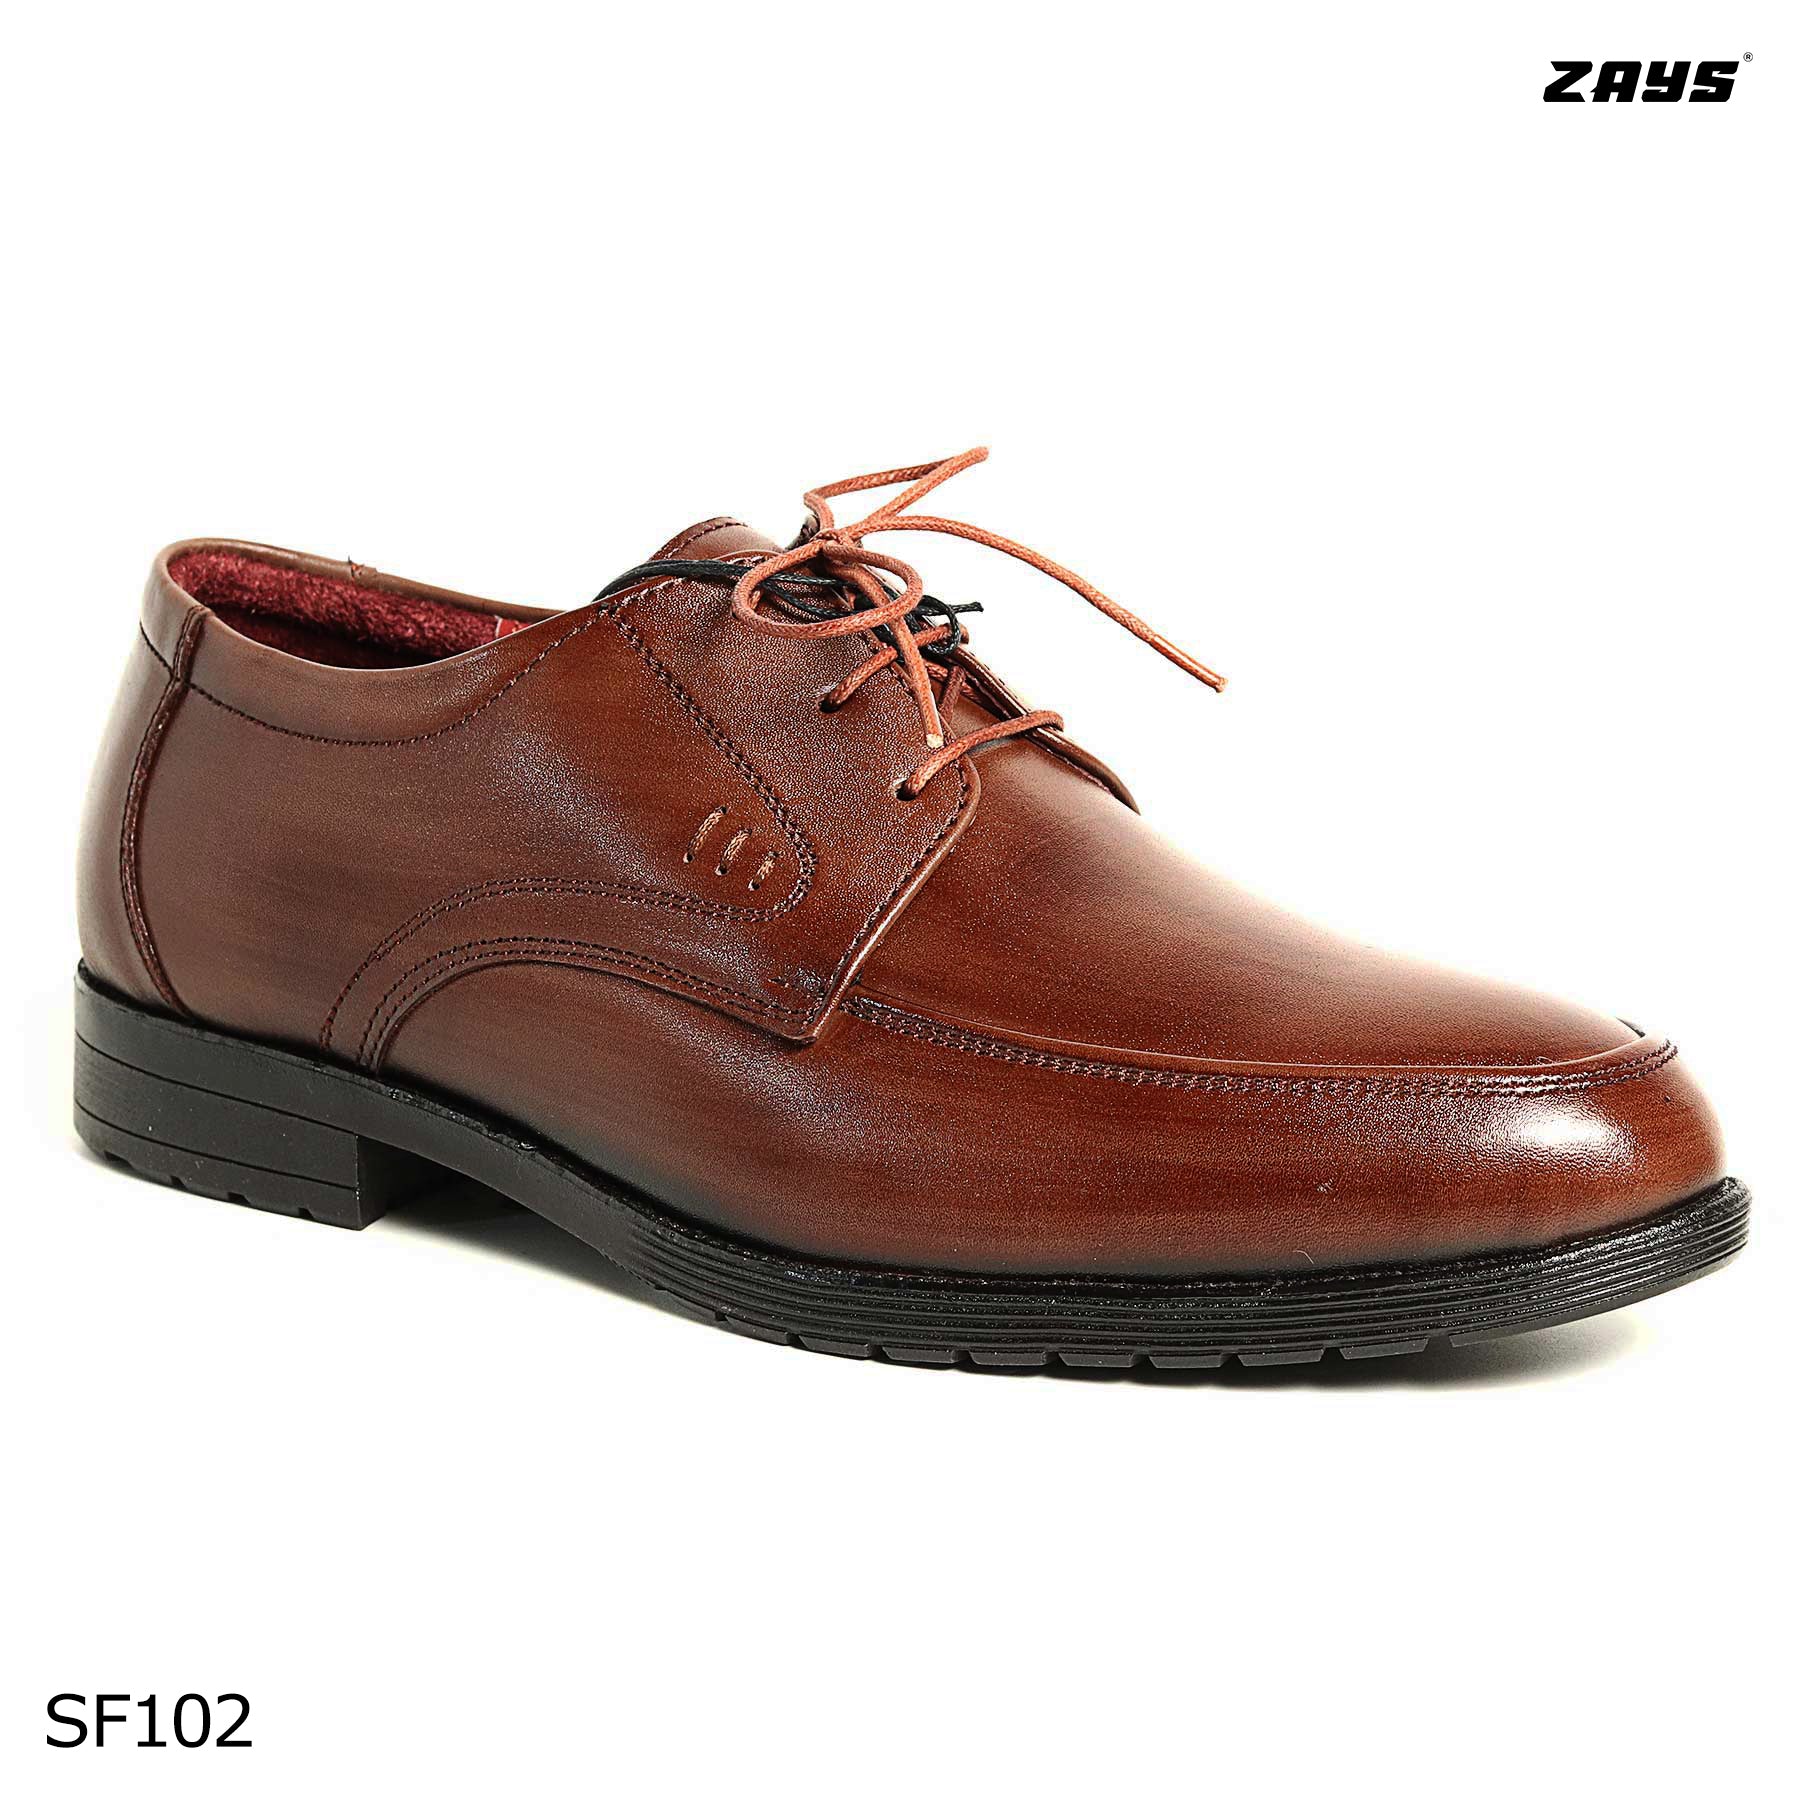 Zays Leather Premium Formal Shoe For Men (Brown) - SF102